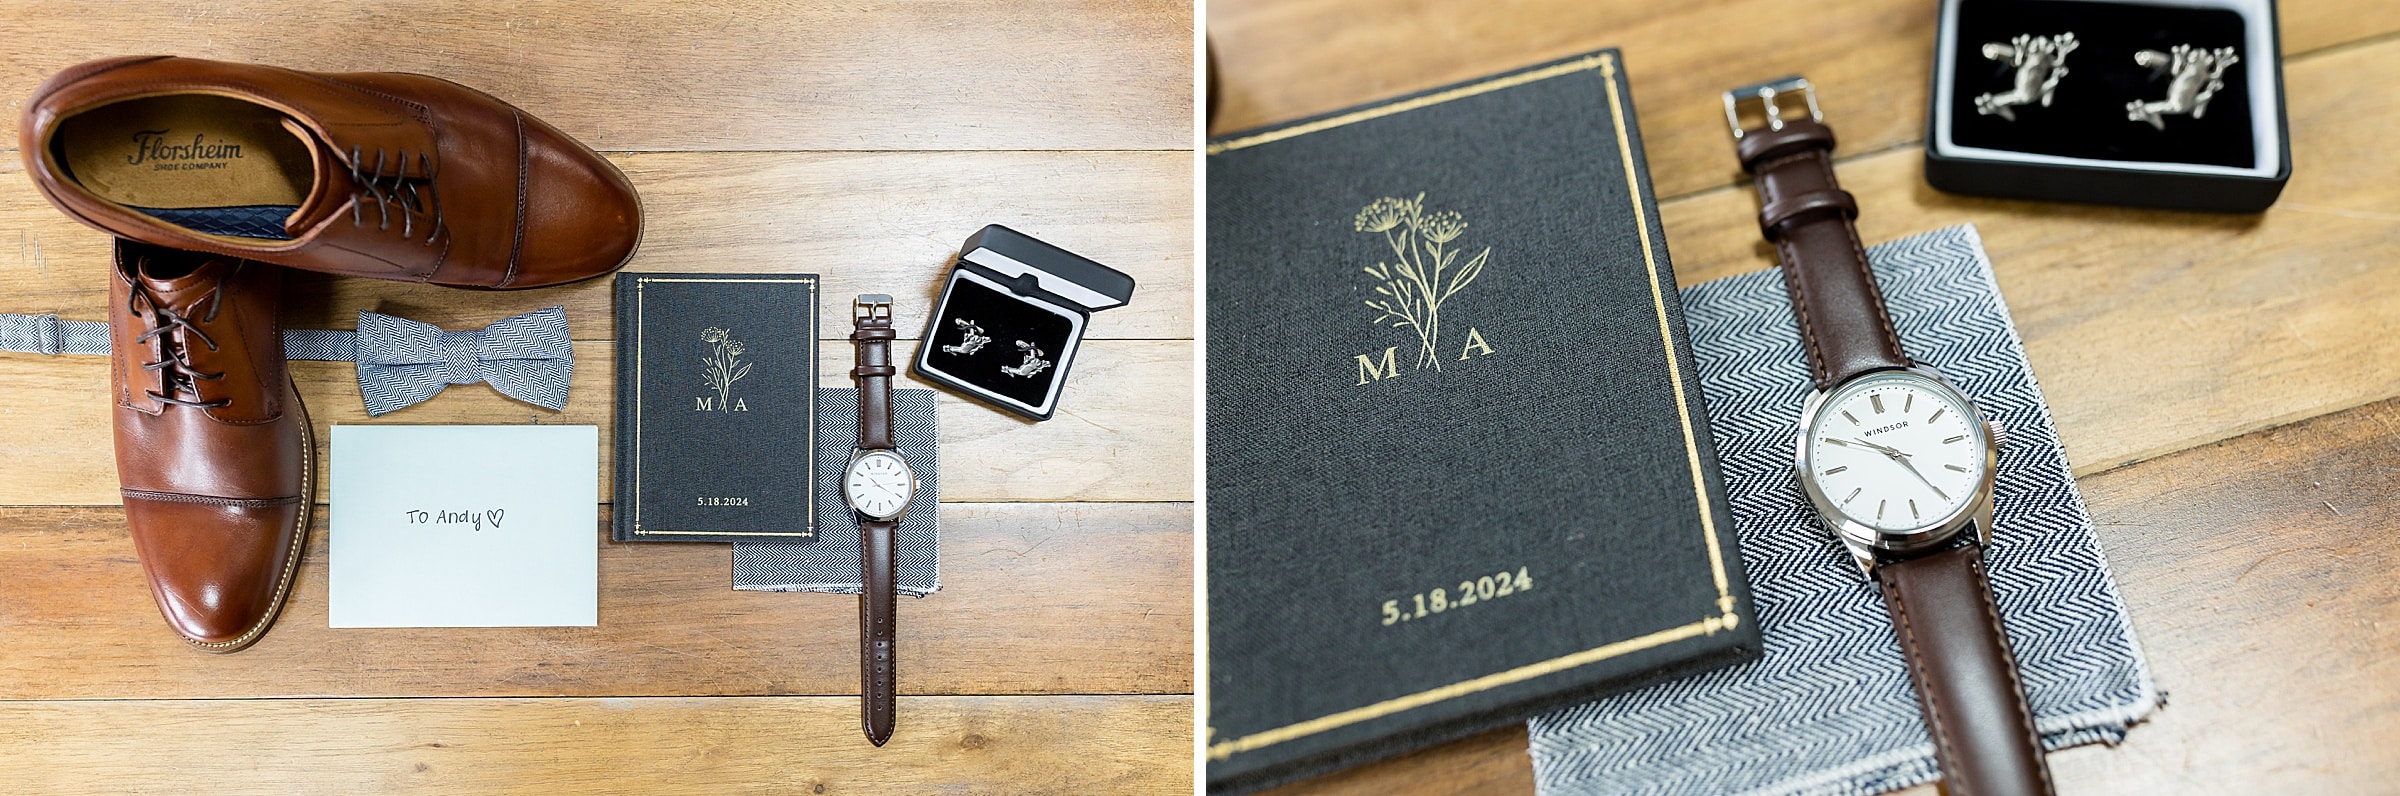 A pair of brown leather shoes, a gray bow tie, a wristwatch, cufflinks in a box, and personalized items with initials "M A" and date "5.18.2024" are arranged neatly on a wooden floor.